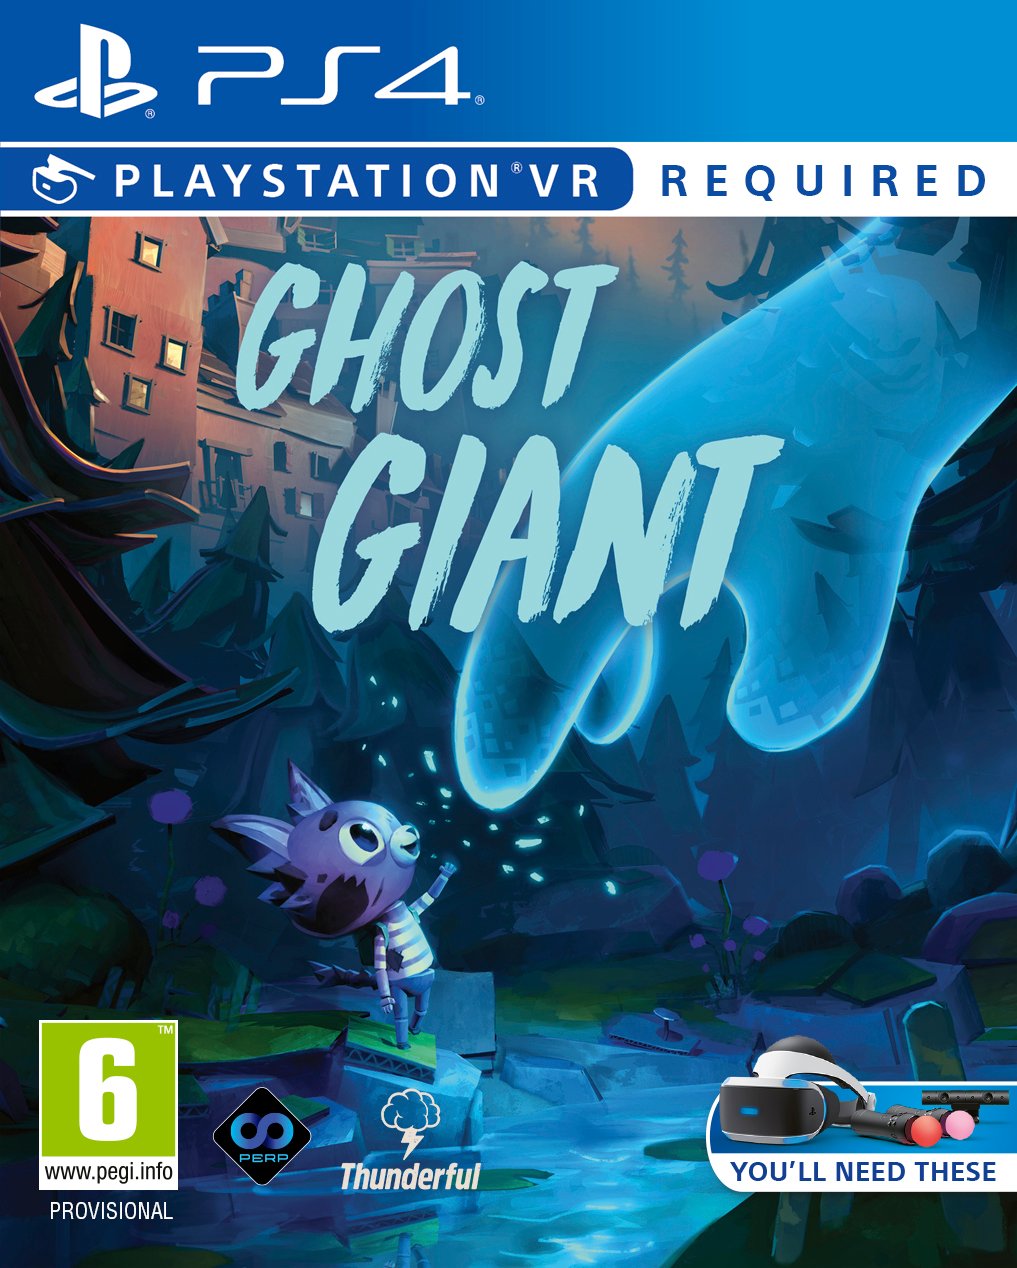 download ghost giant for free